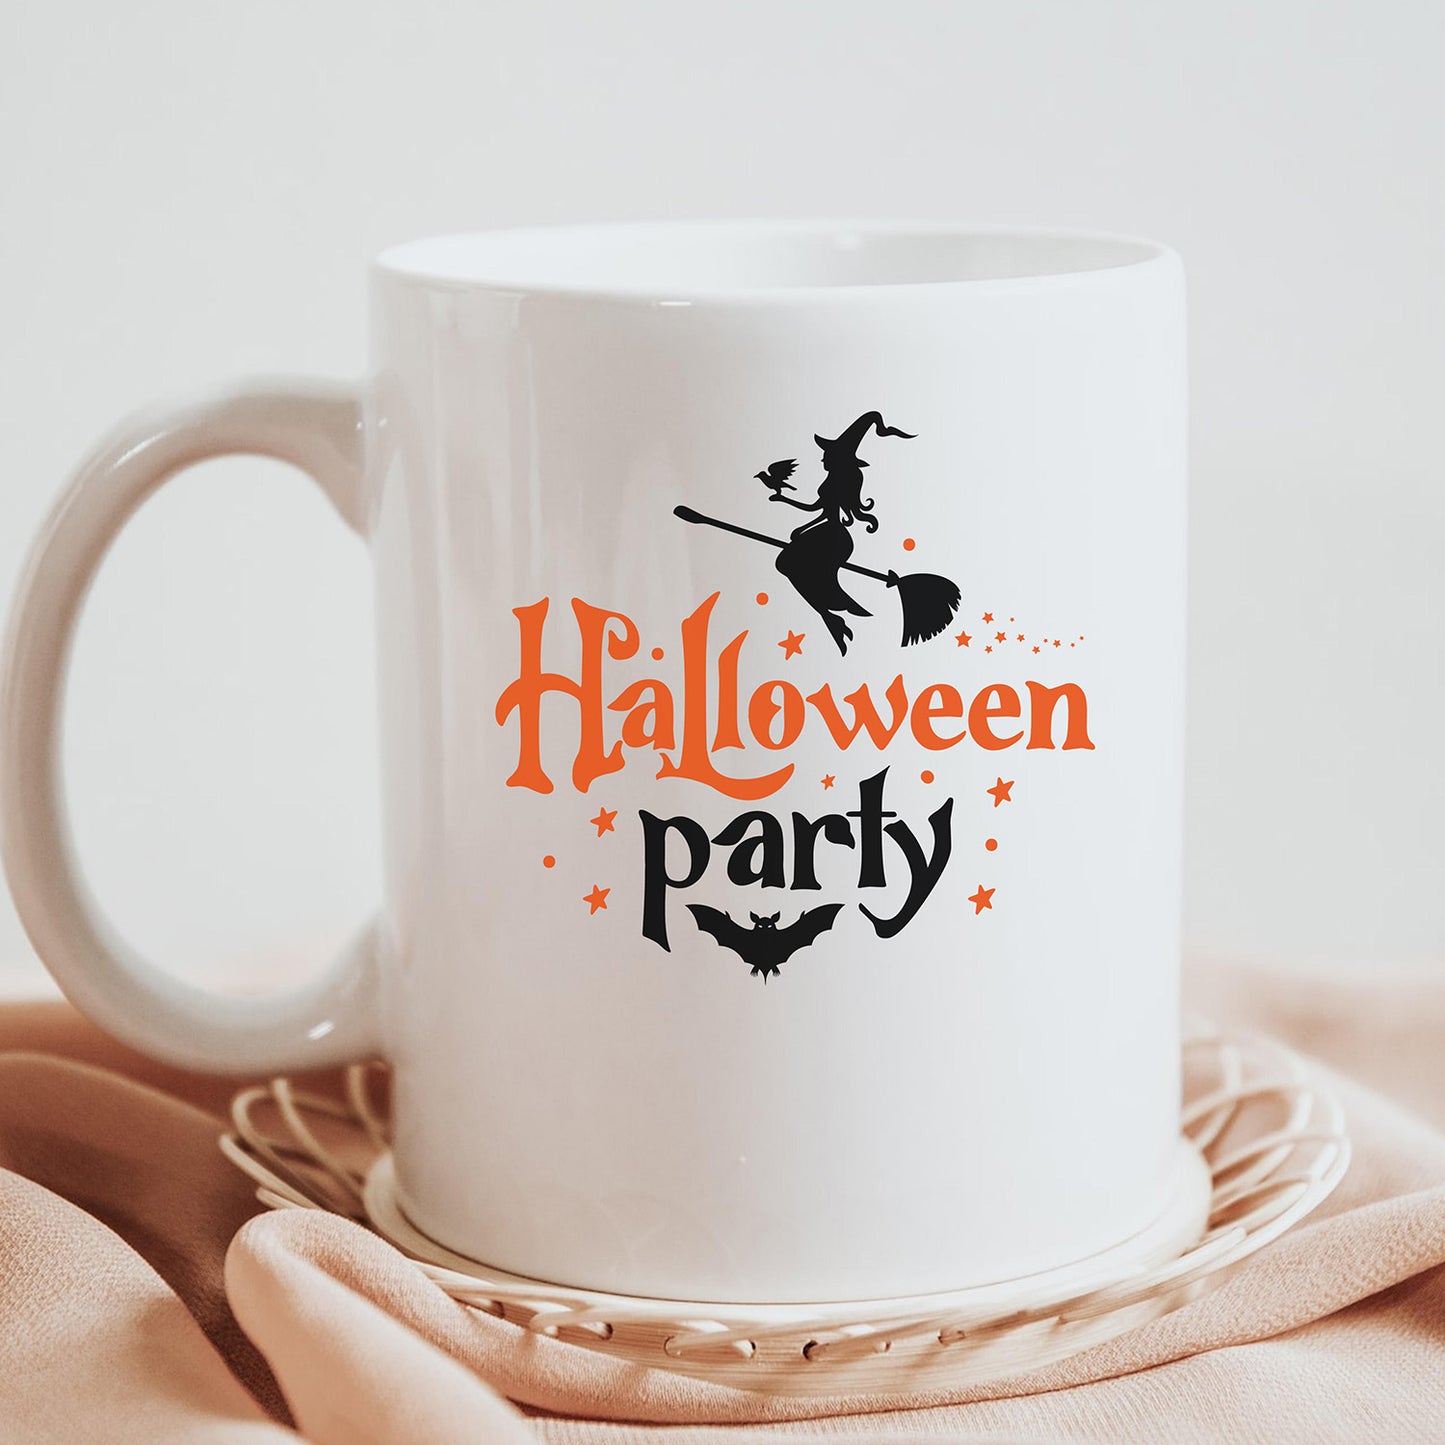 "Halloween Party" Graphic